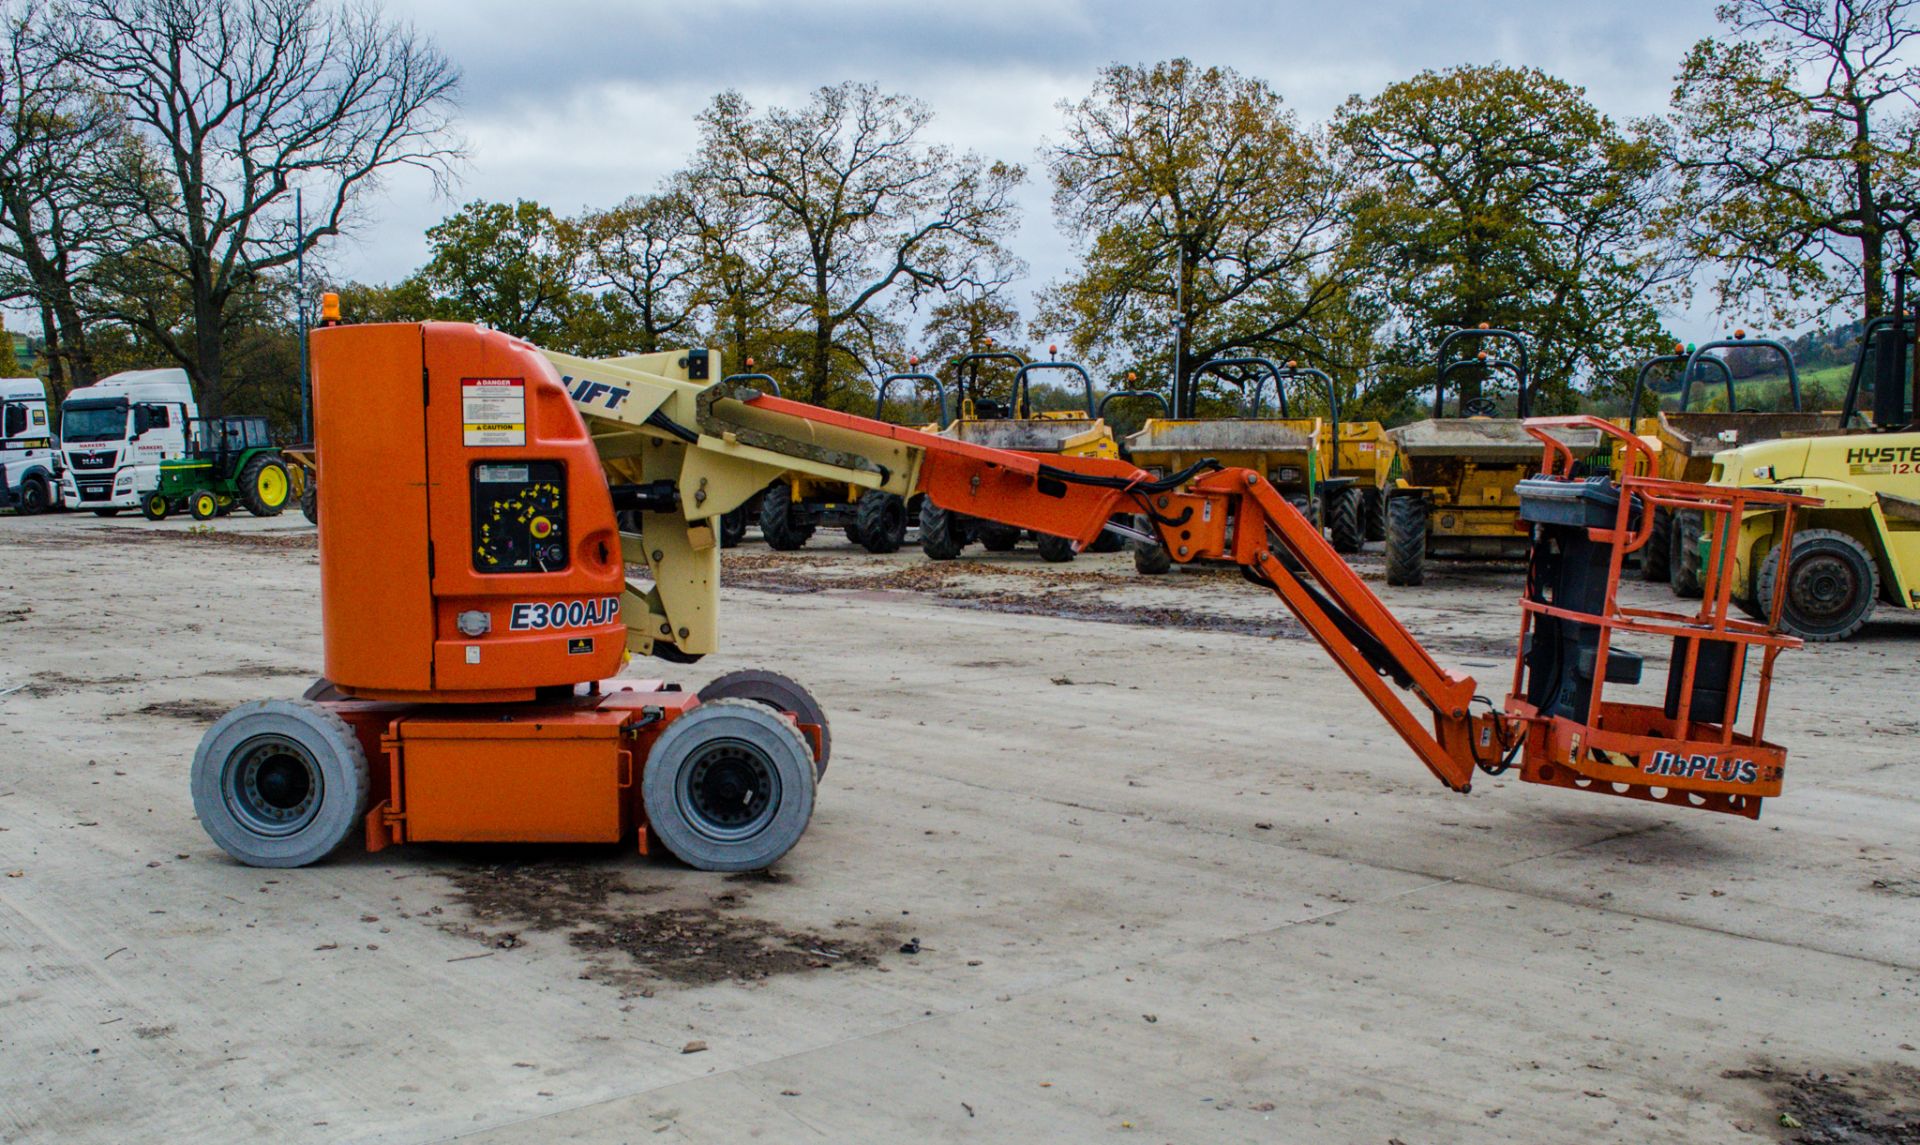 JLG 300AJP battery operated 30ft articulated boom lift Year: 2001 S/N: 0065700 Recorded hours: 663 - Image 7 of 16